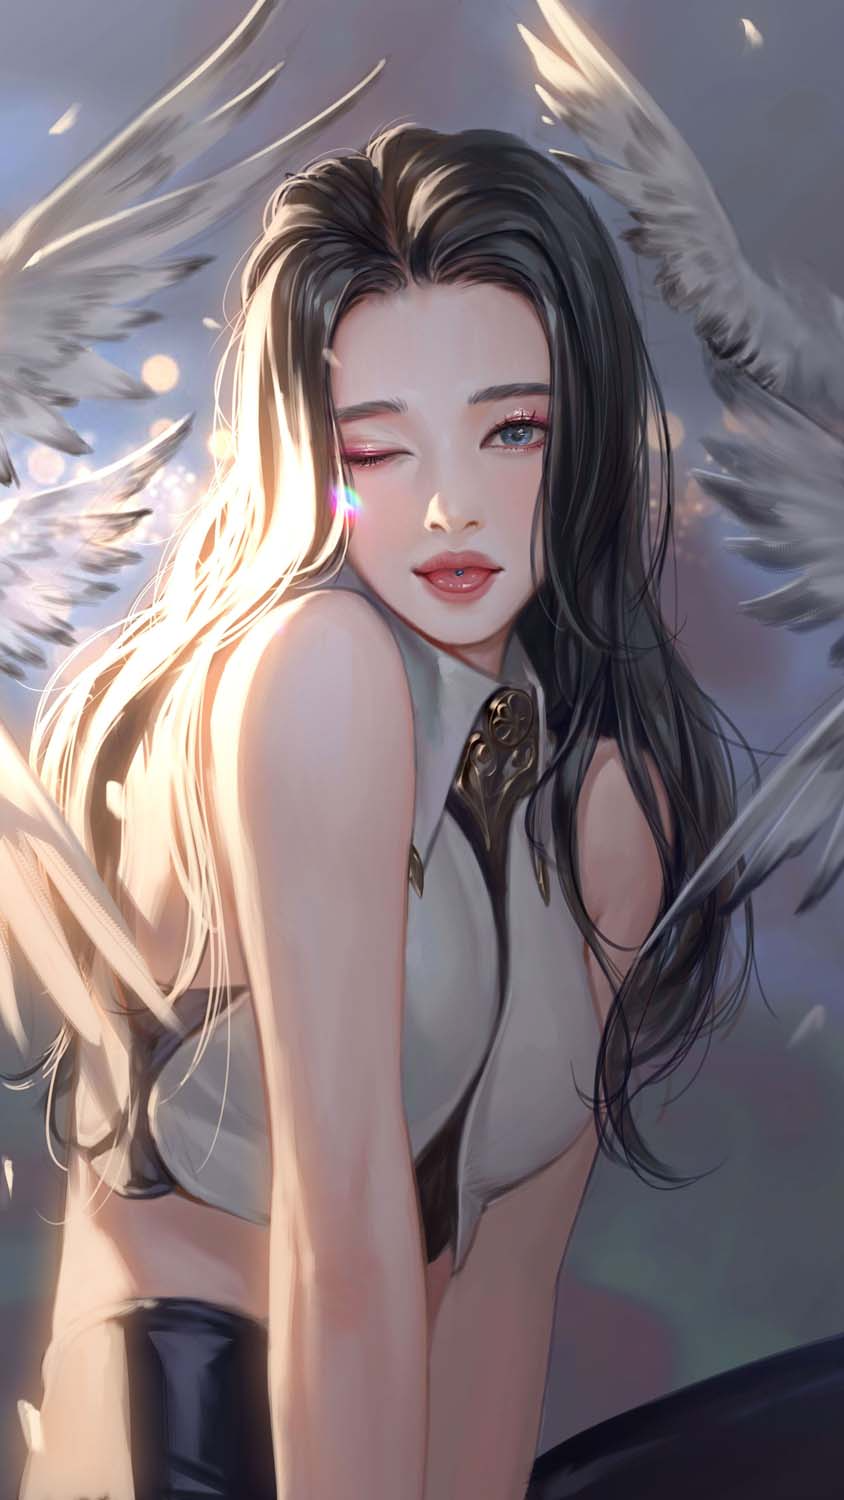 Anime Angel Girl IPhone Wallpaper HD  IPhone Wallpapers